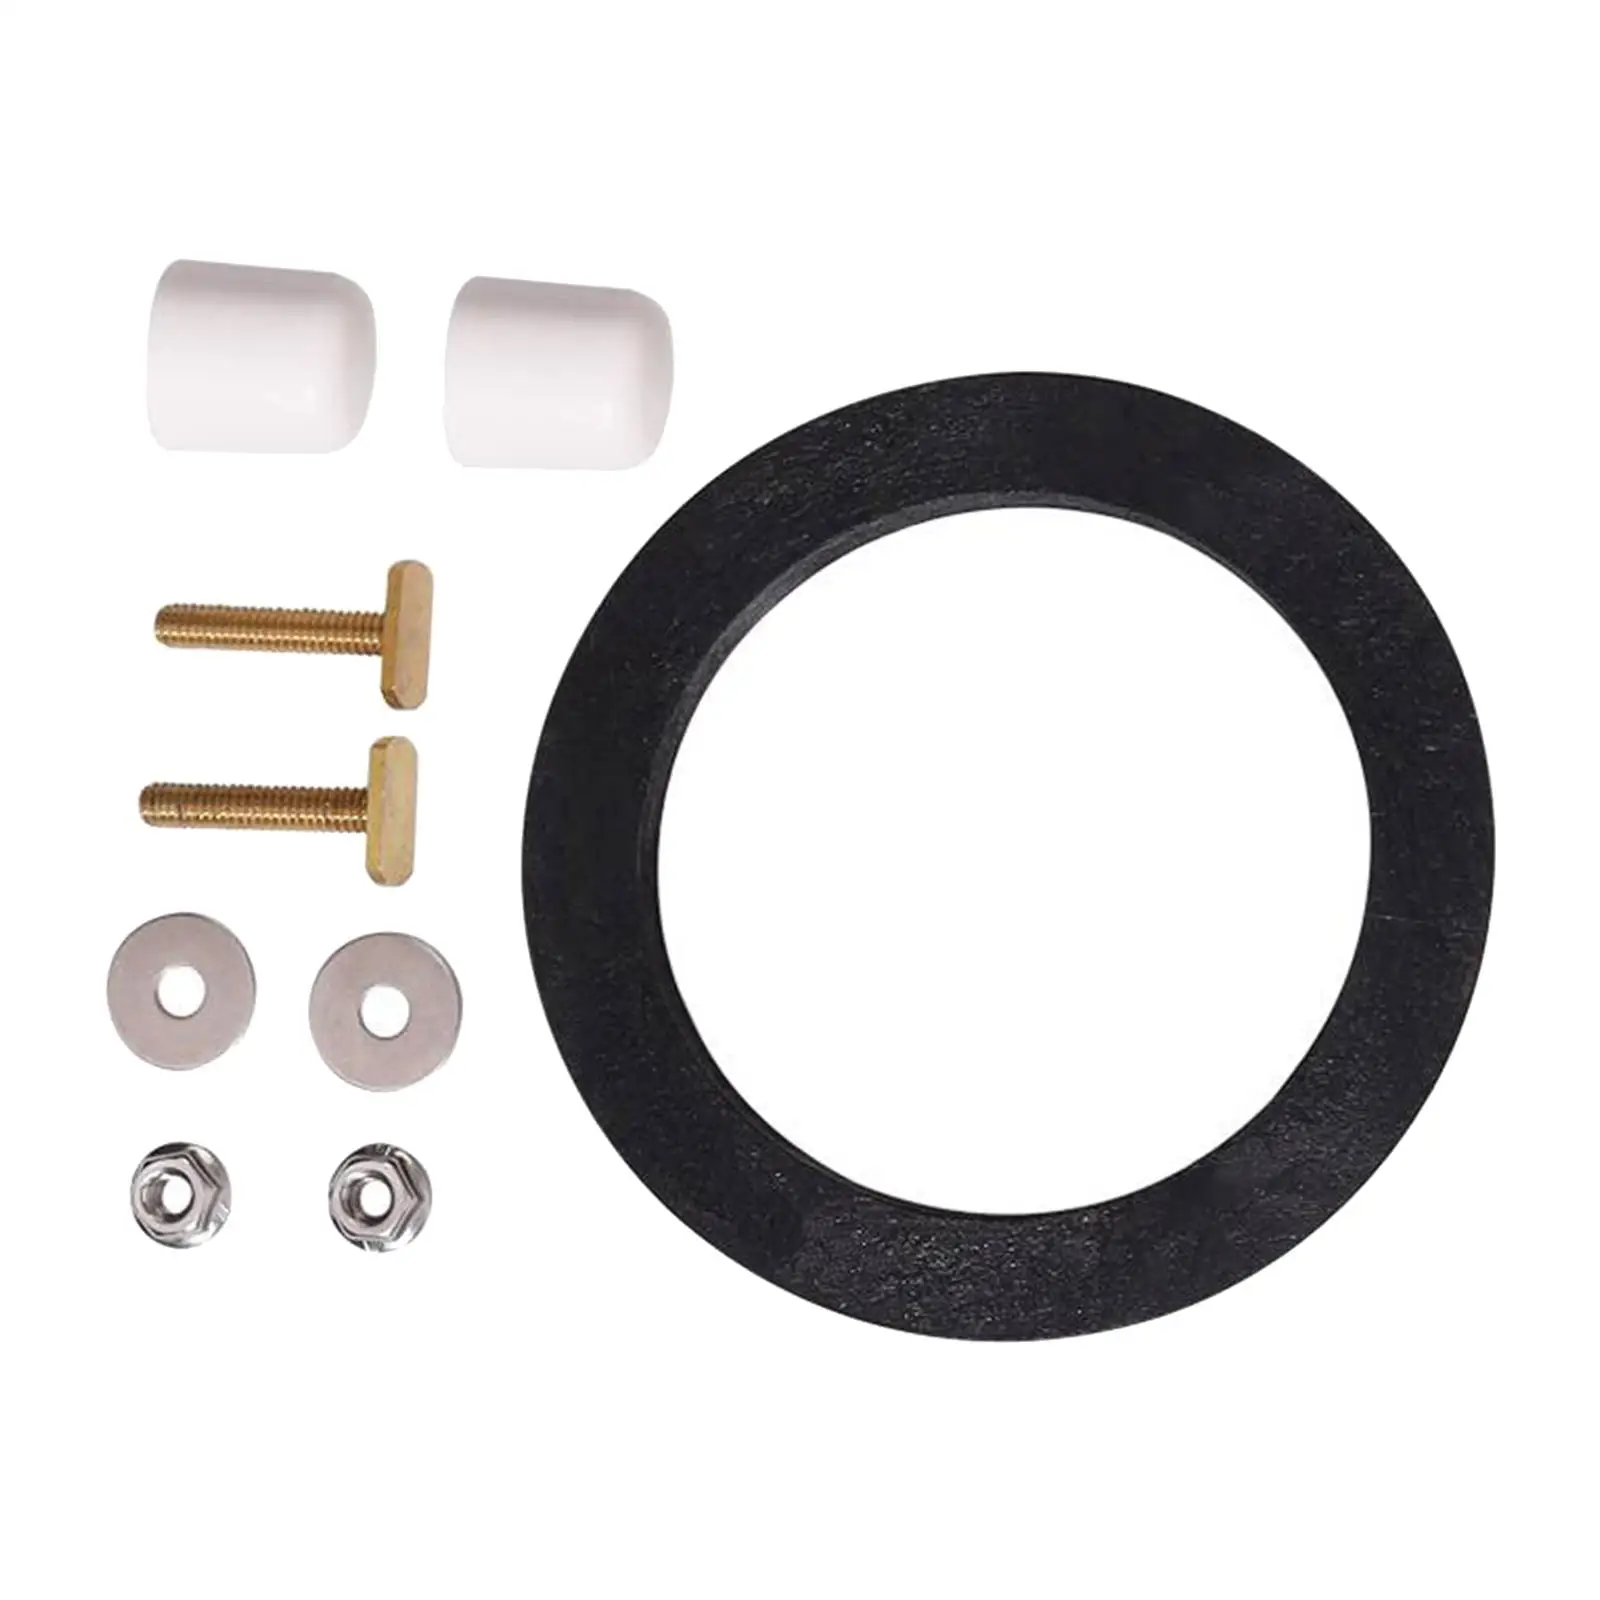 RV Toilet Toilet Mounting Hardware Kit for Dometic 300 Series Toilets Stable Performance Easy to Install Toilet Accessories